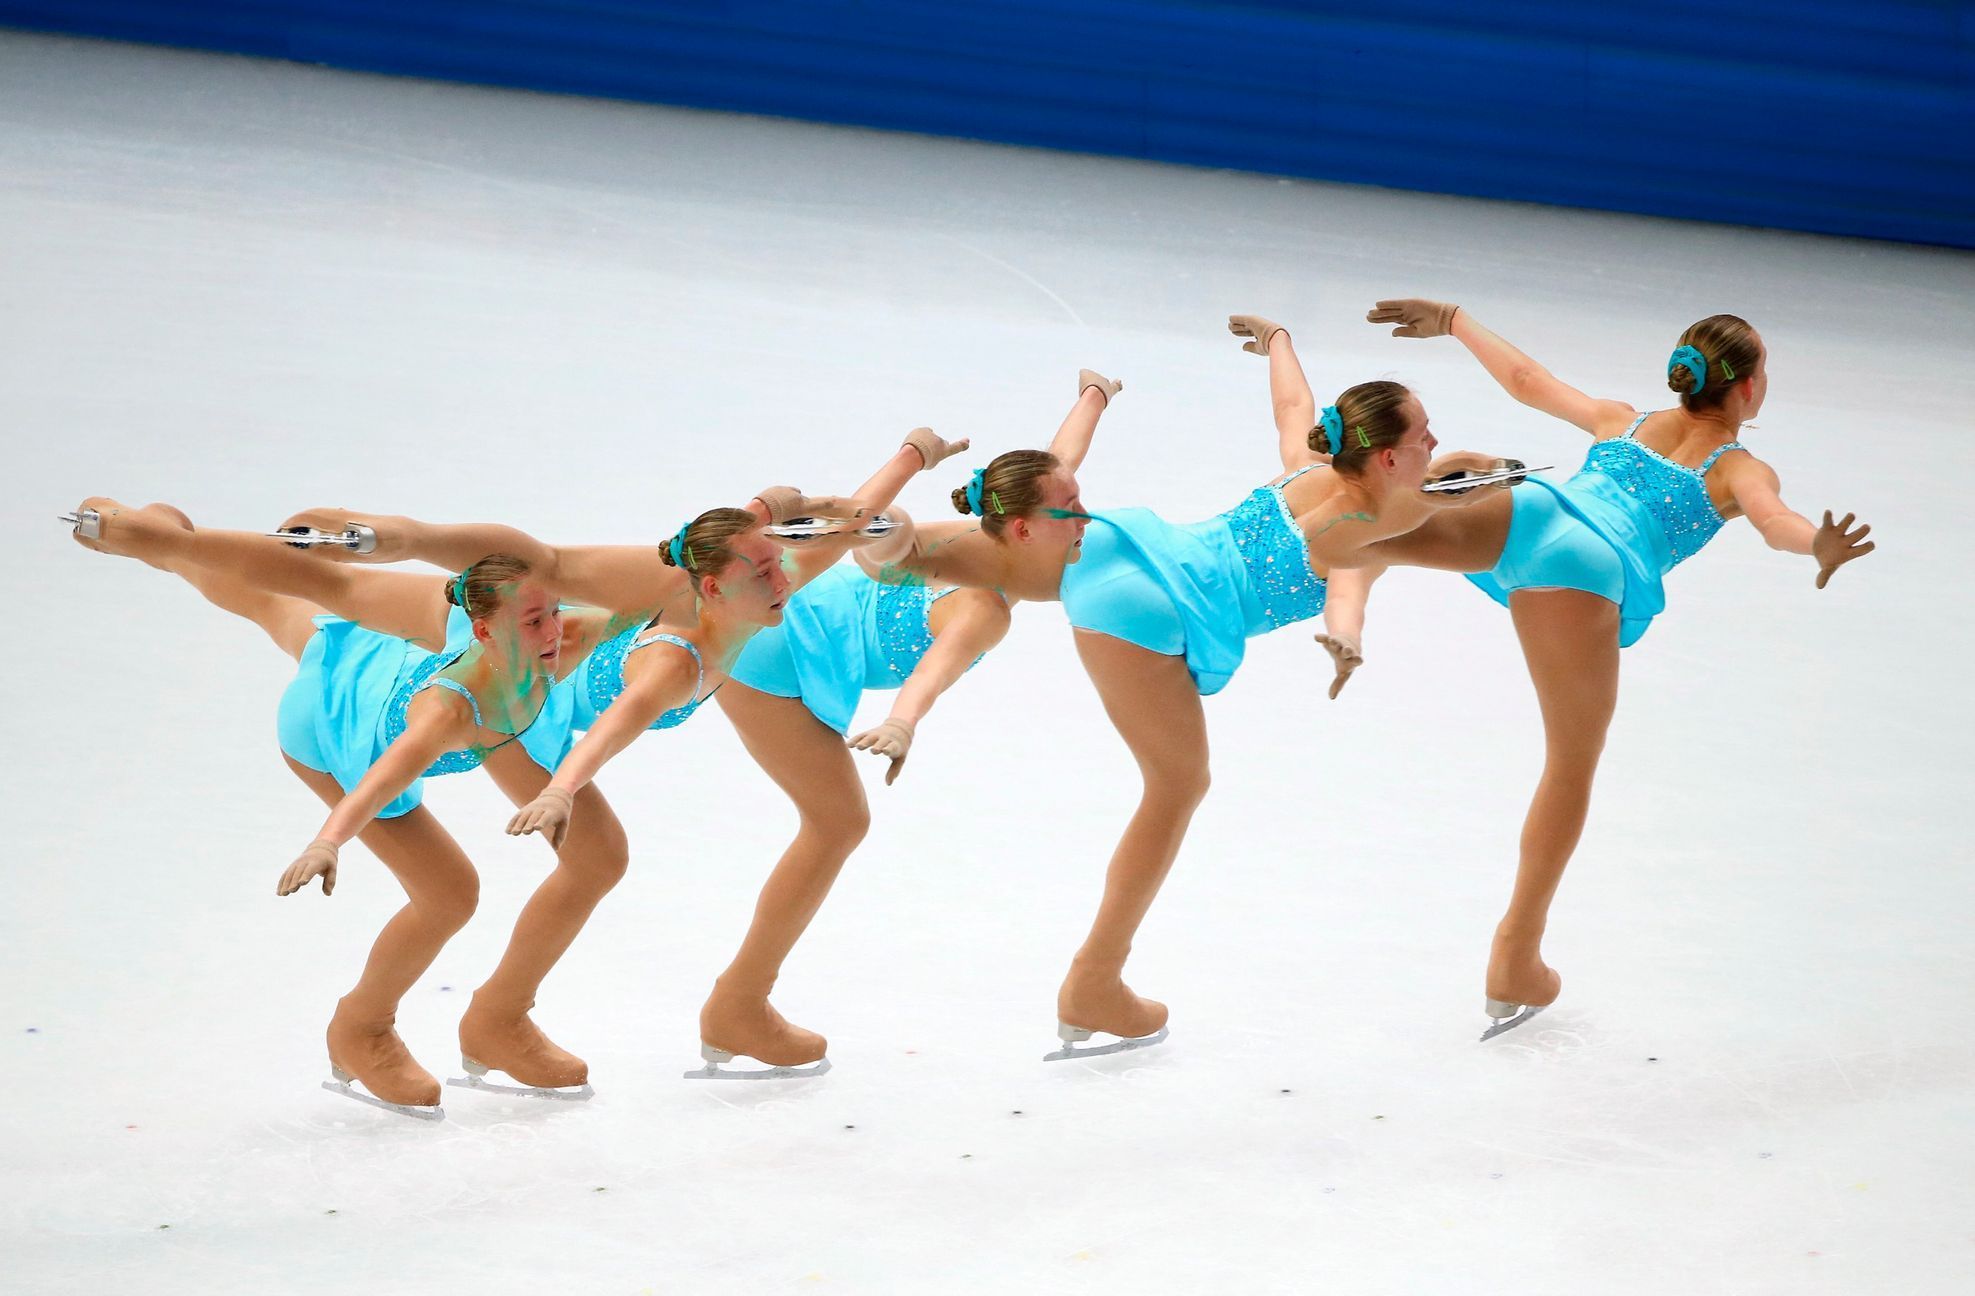 Elizaveta Ukolova of the Czech Republic practices her routine during a figure skating training session at the Iceberg Skating Palace during the 2014 Sochi Winter Olympics